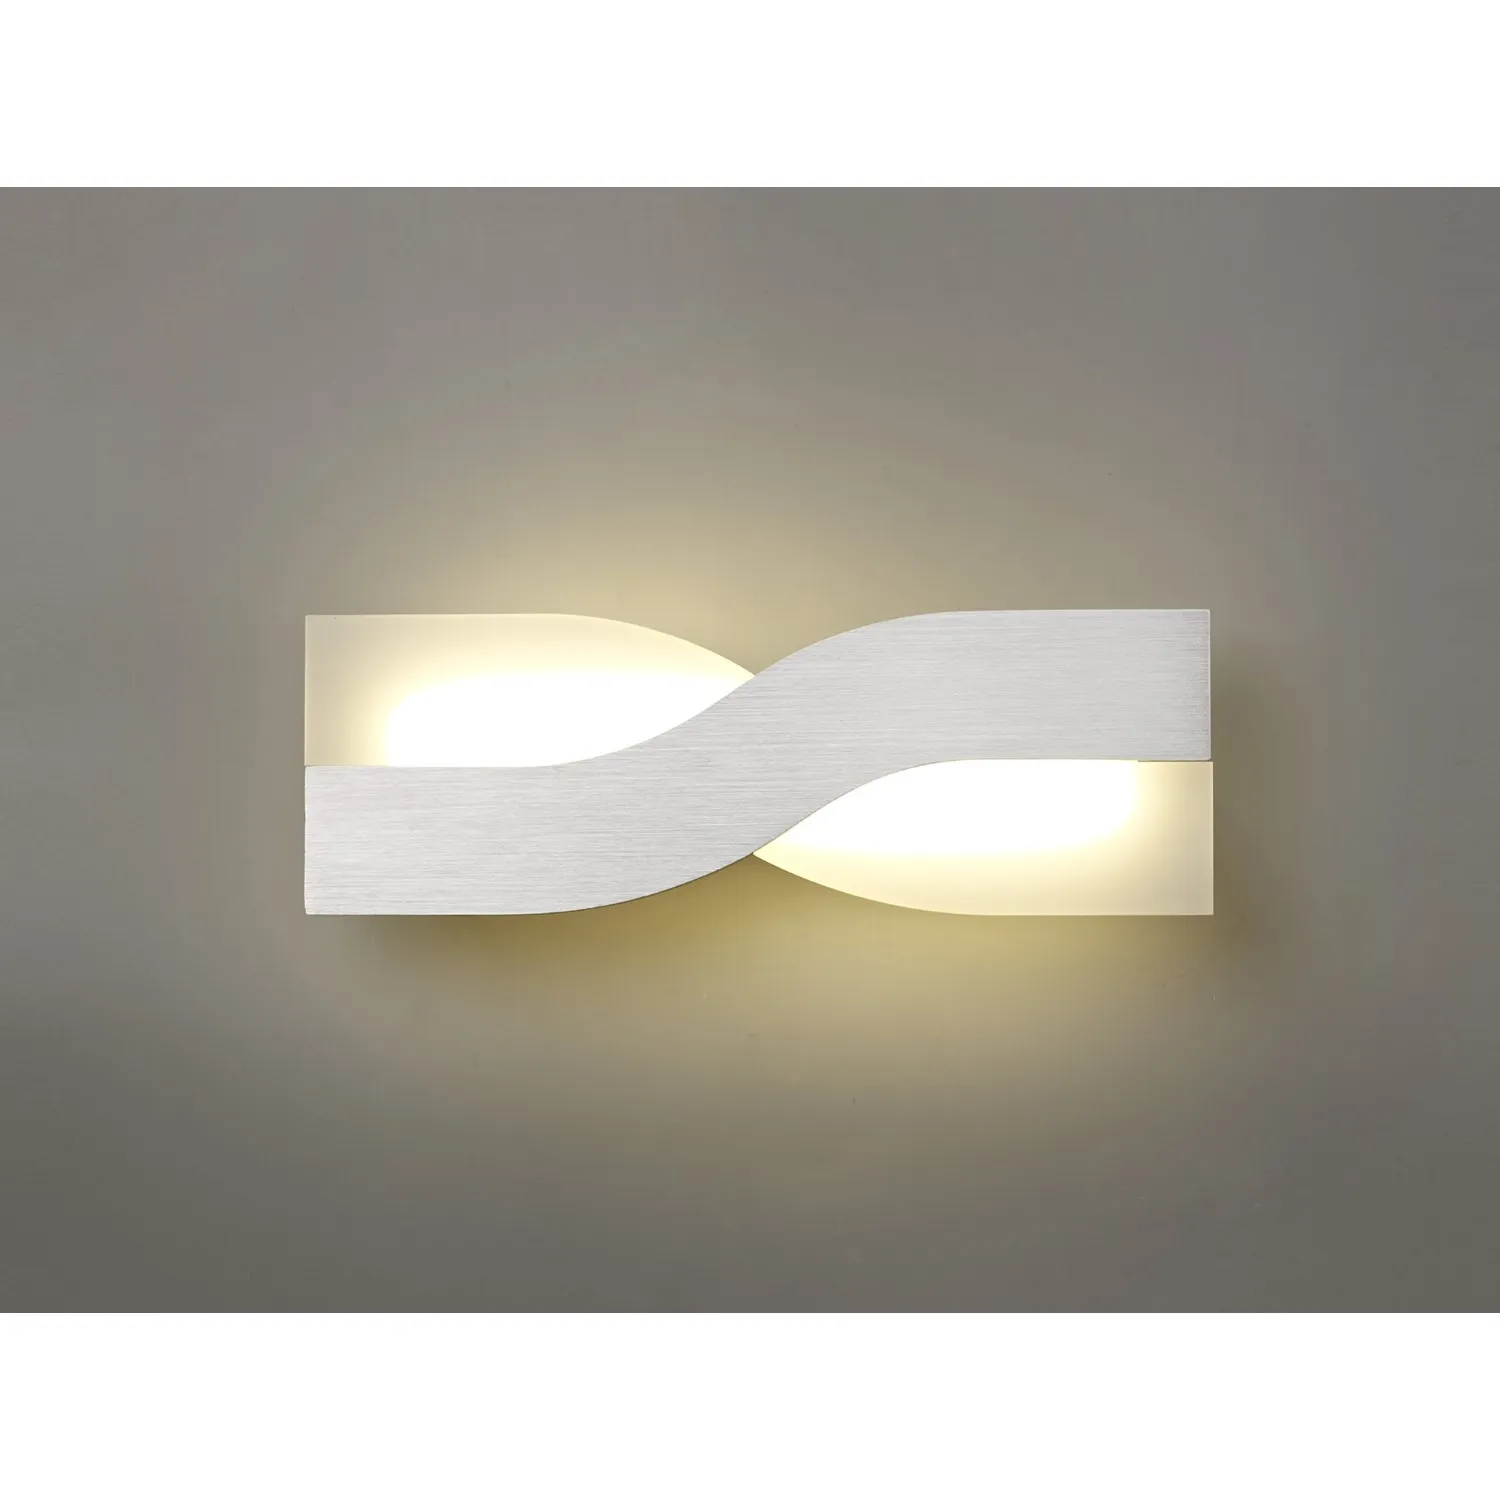 Sussex Wall Lamp, 1 x 8W LED, 3000K, 640lm, Brushed Aluminium Frosted White, 3yrs Warranty